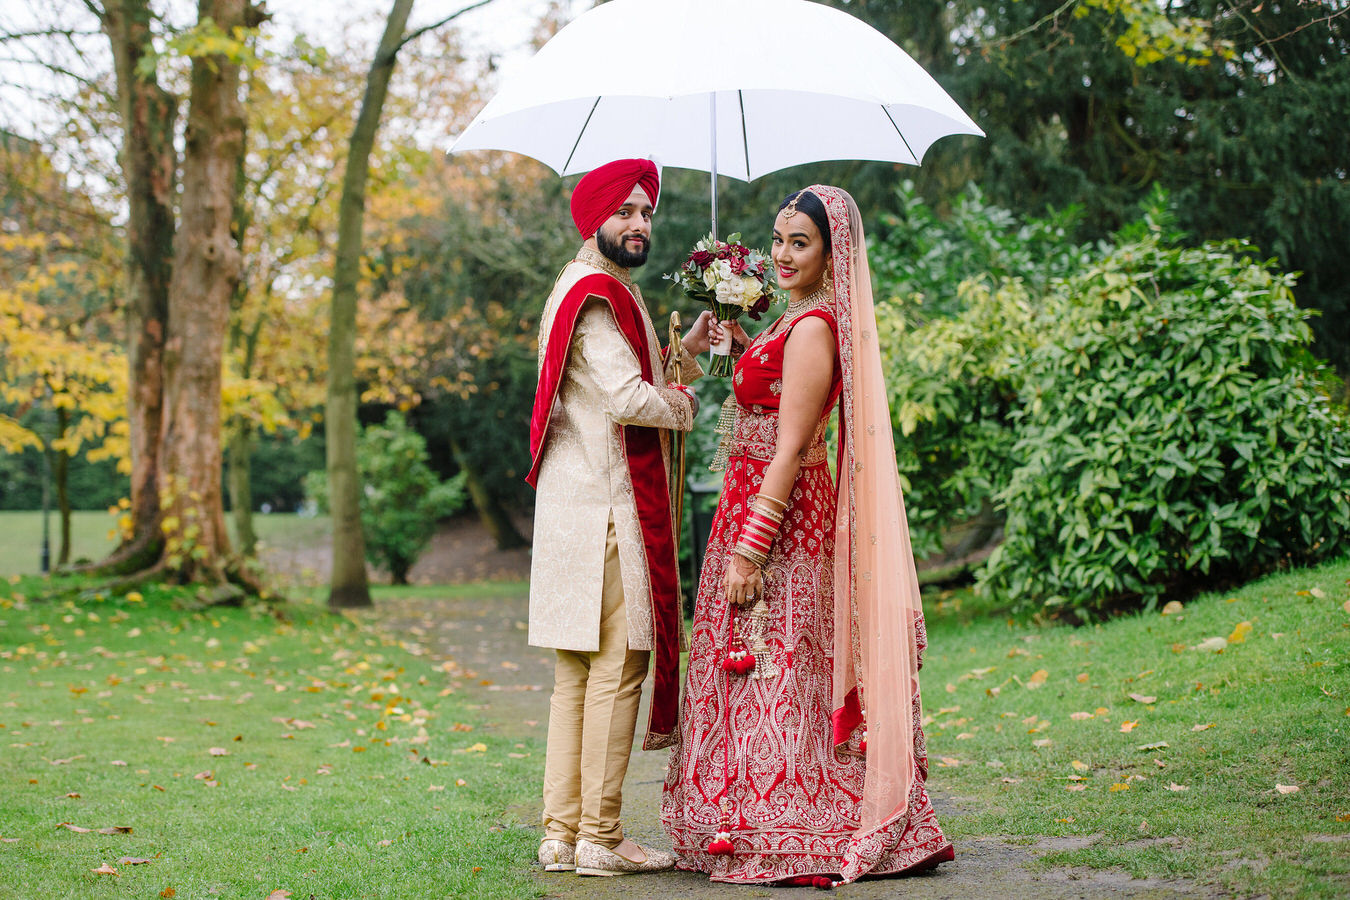 Sikh Asian wedding bride and groom in the garden holding a white umbrella and a bouquet in hands
